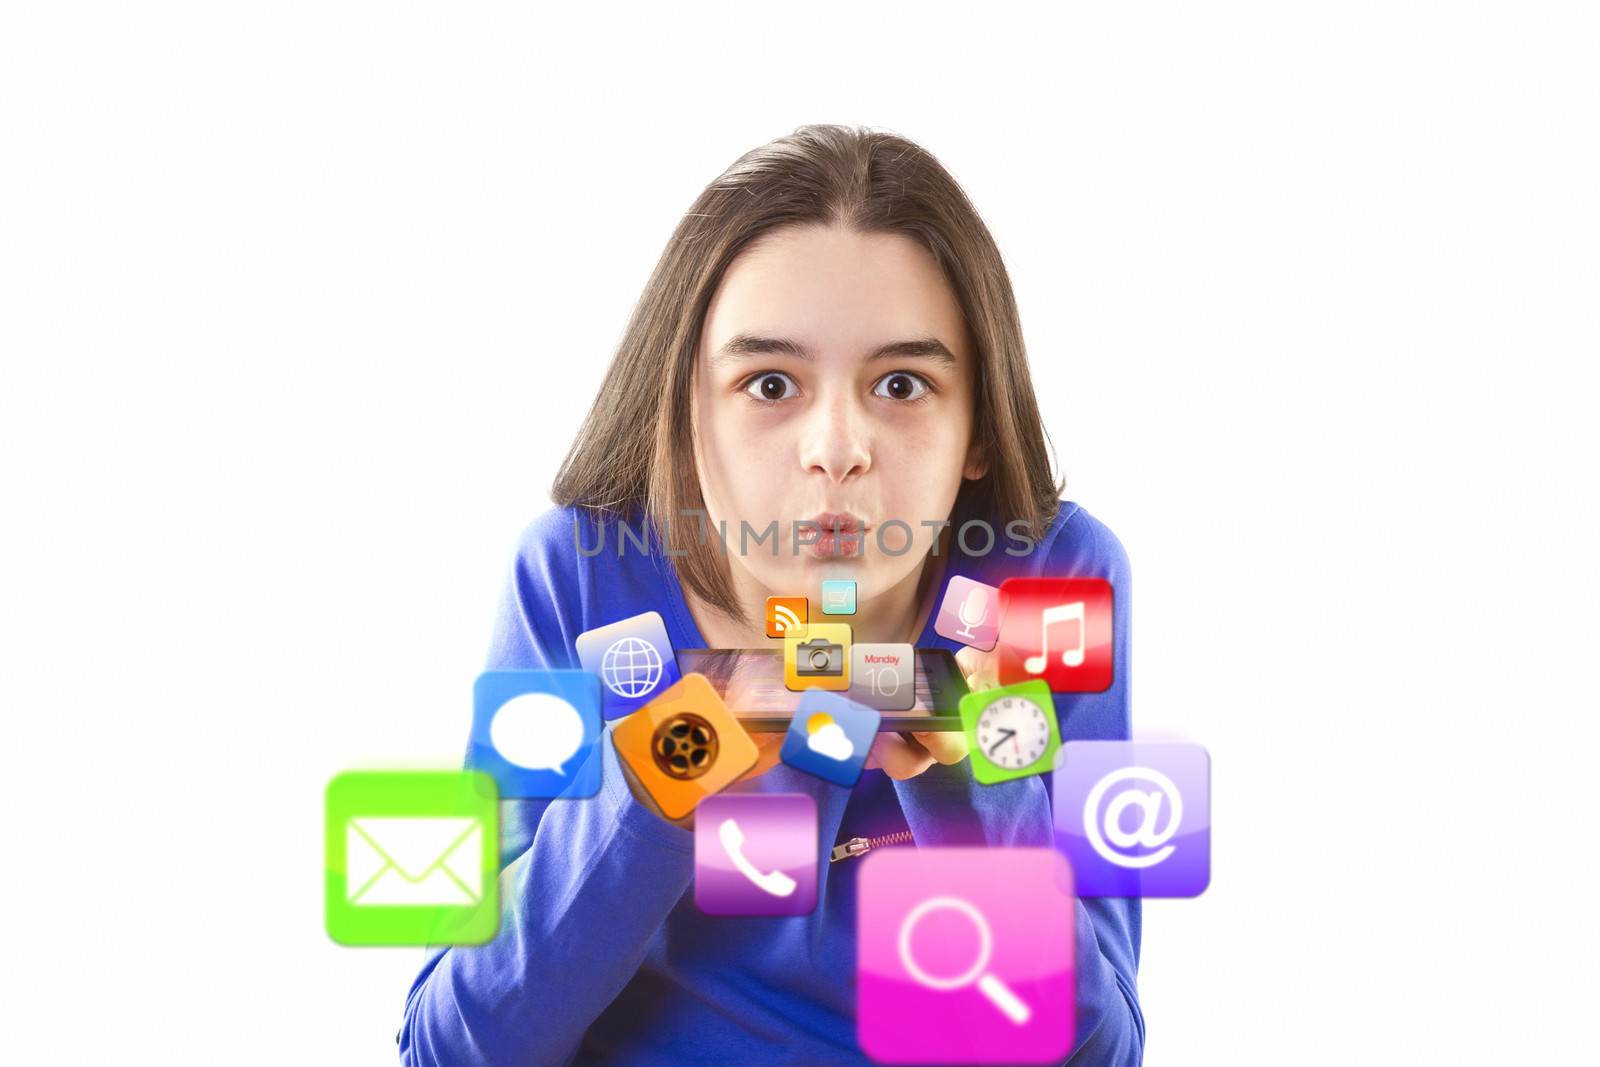 Teenage girl blowing icons from digital tablet by manaemedia